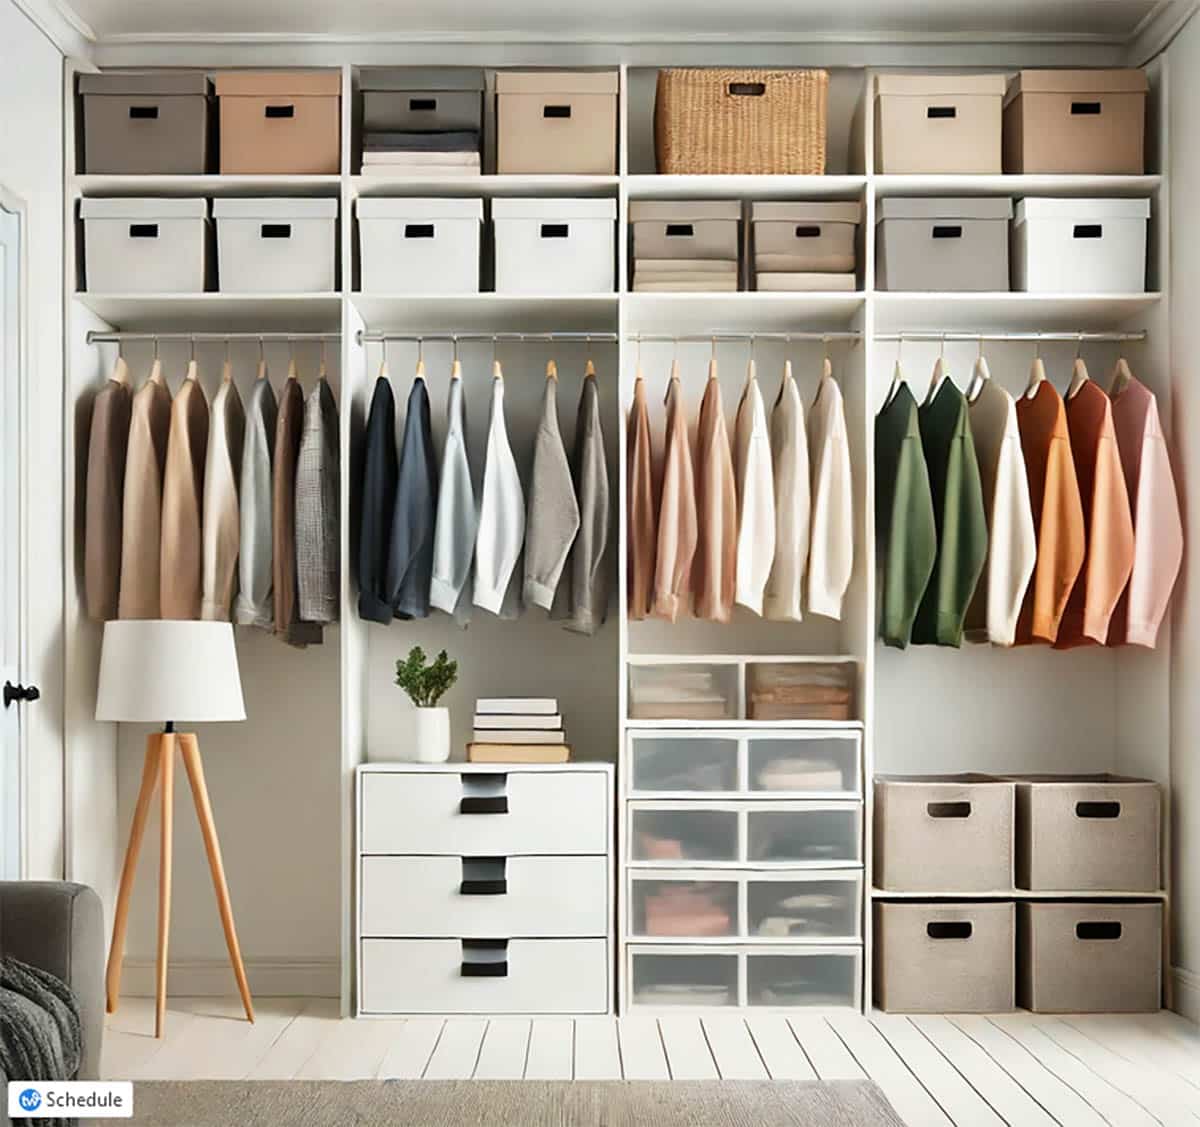 Organized closet with baskets and drawers